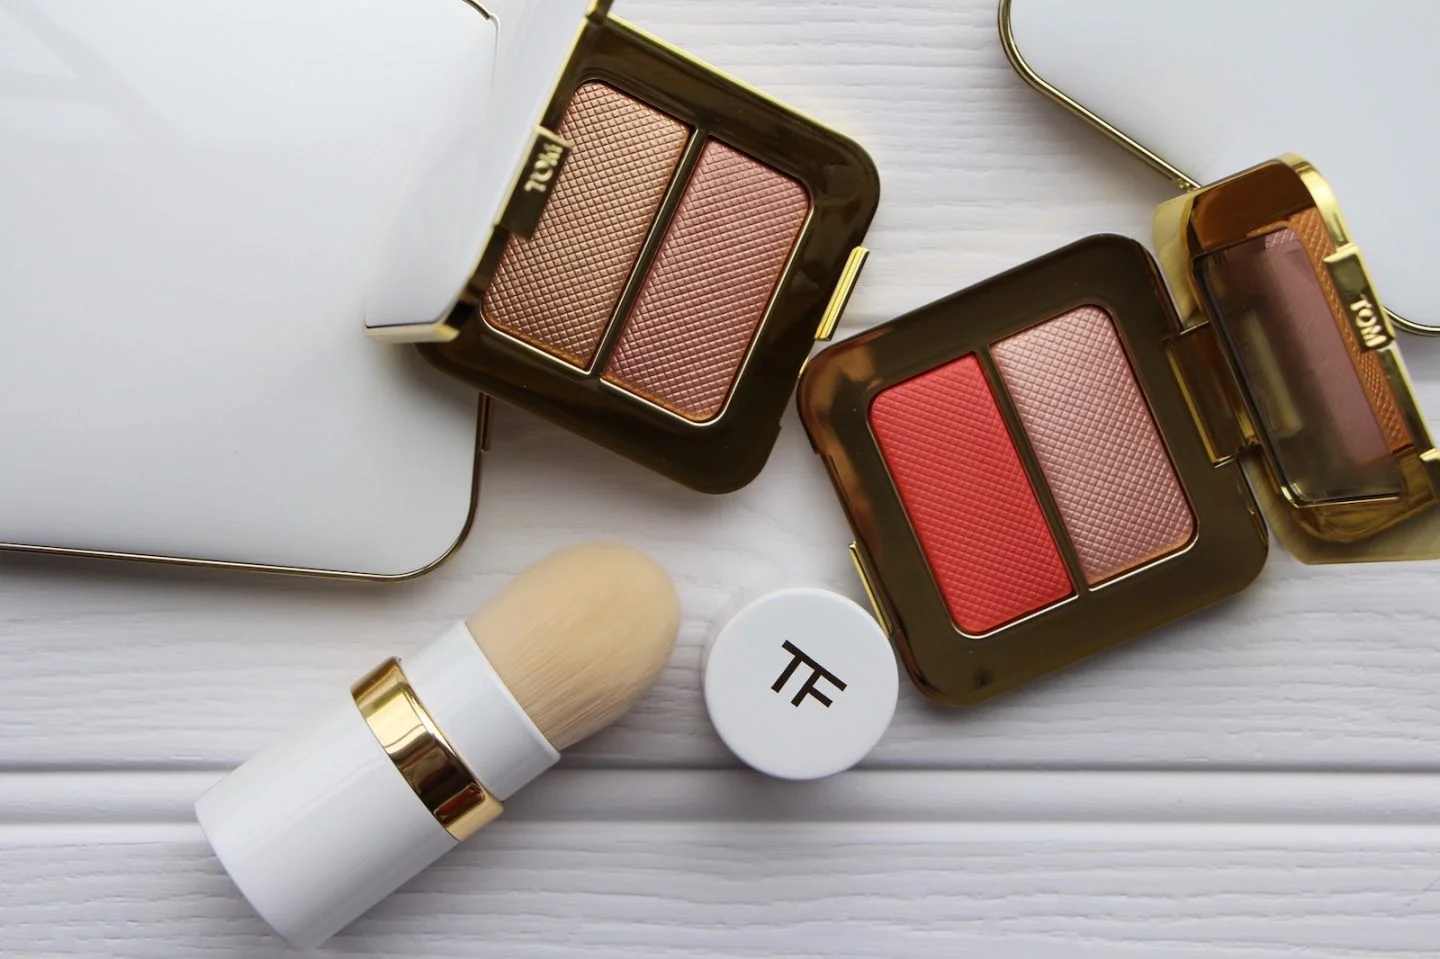 Tom Ford Soleil Makeup Collection